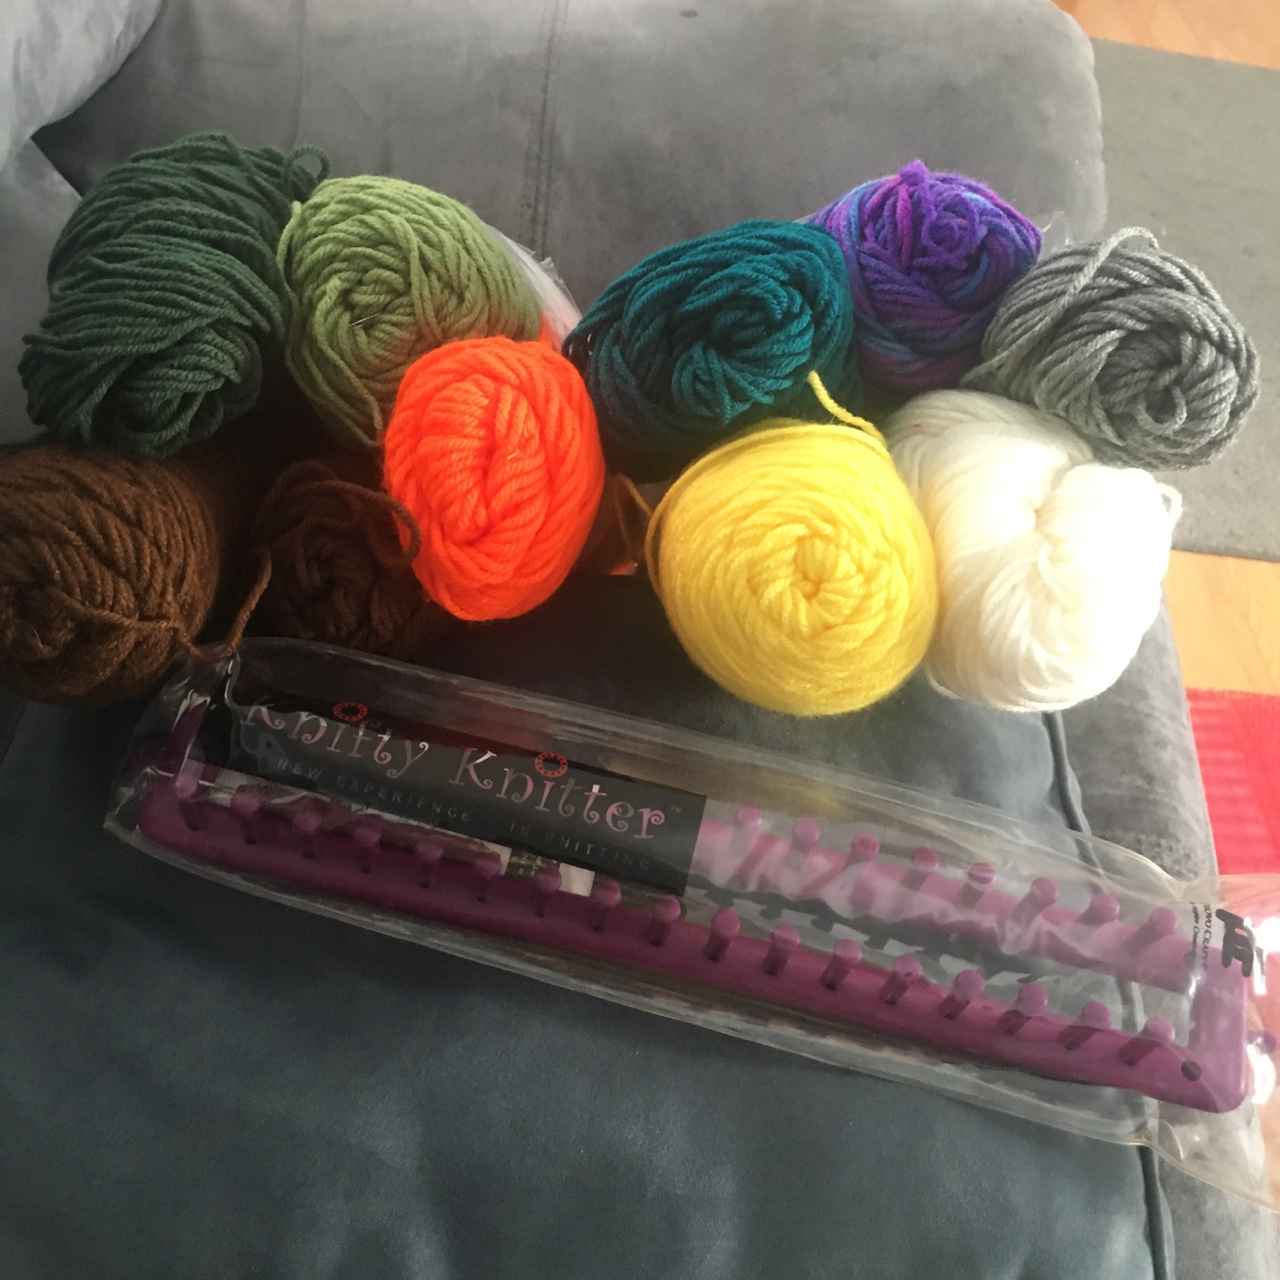 The ends of 10 skeins of basic 4-ply yarn, stacked on top of one another like logs, each a different bright or dark color. In front of the yarn, a rake, or rectangular loom.